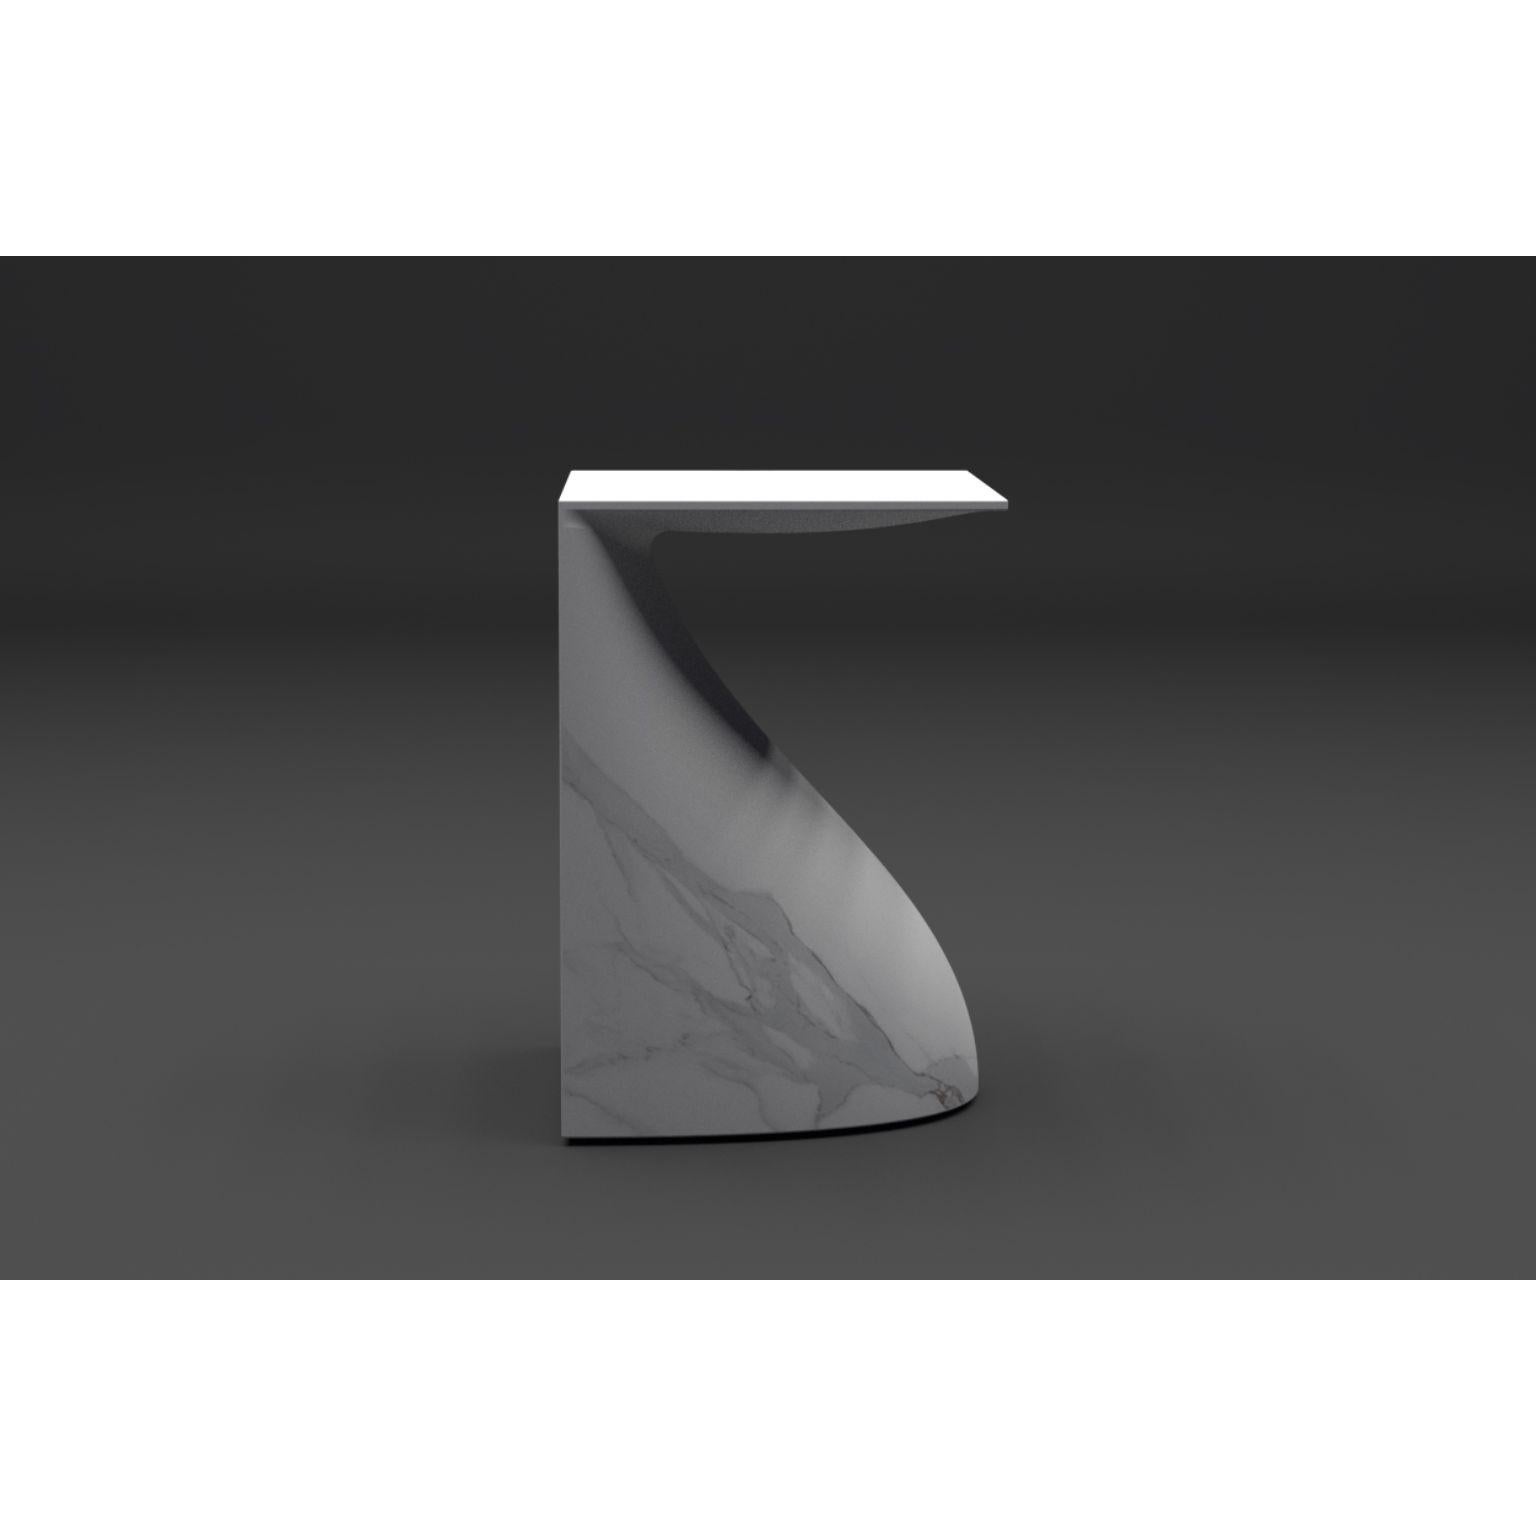 Ula sculpture pull up white table by Veronica Mar
Dimensions: D40 x W40 x H60 cm
Materials: Marble
Weight: 90 kg.
Numbered and limited edition

Ula sculpture pull up table can be a bespoke piece. Custom dimensions and type of marble available